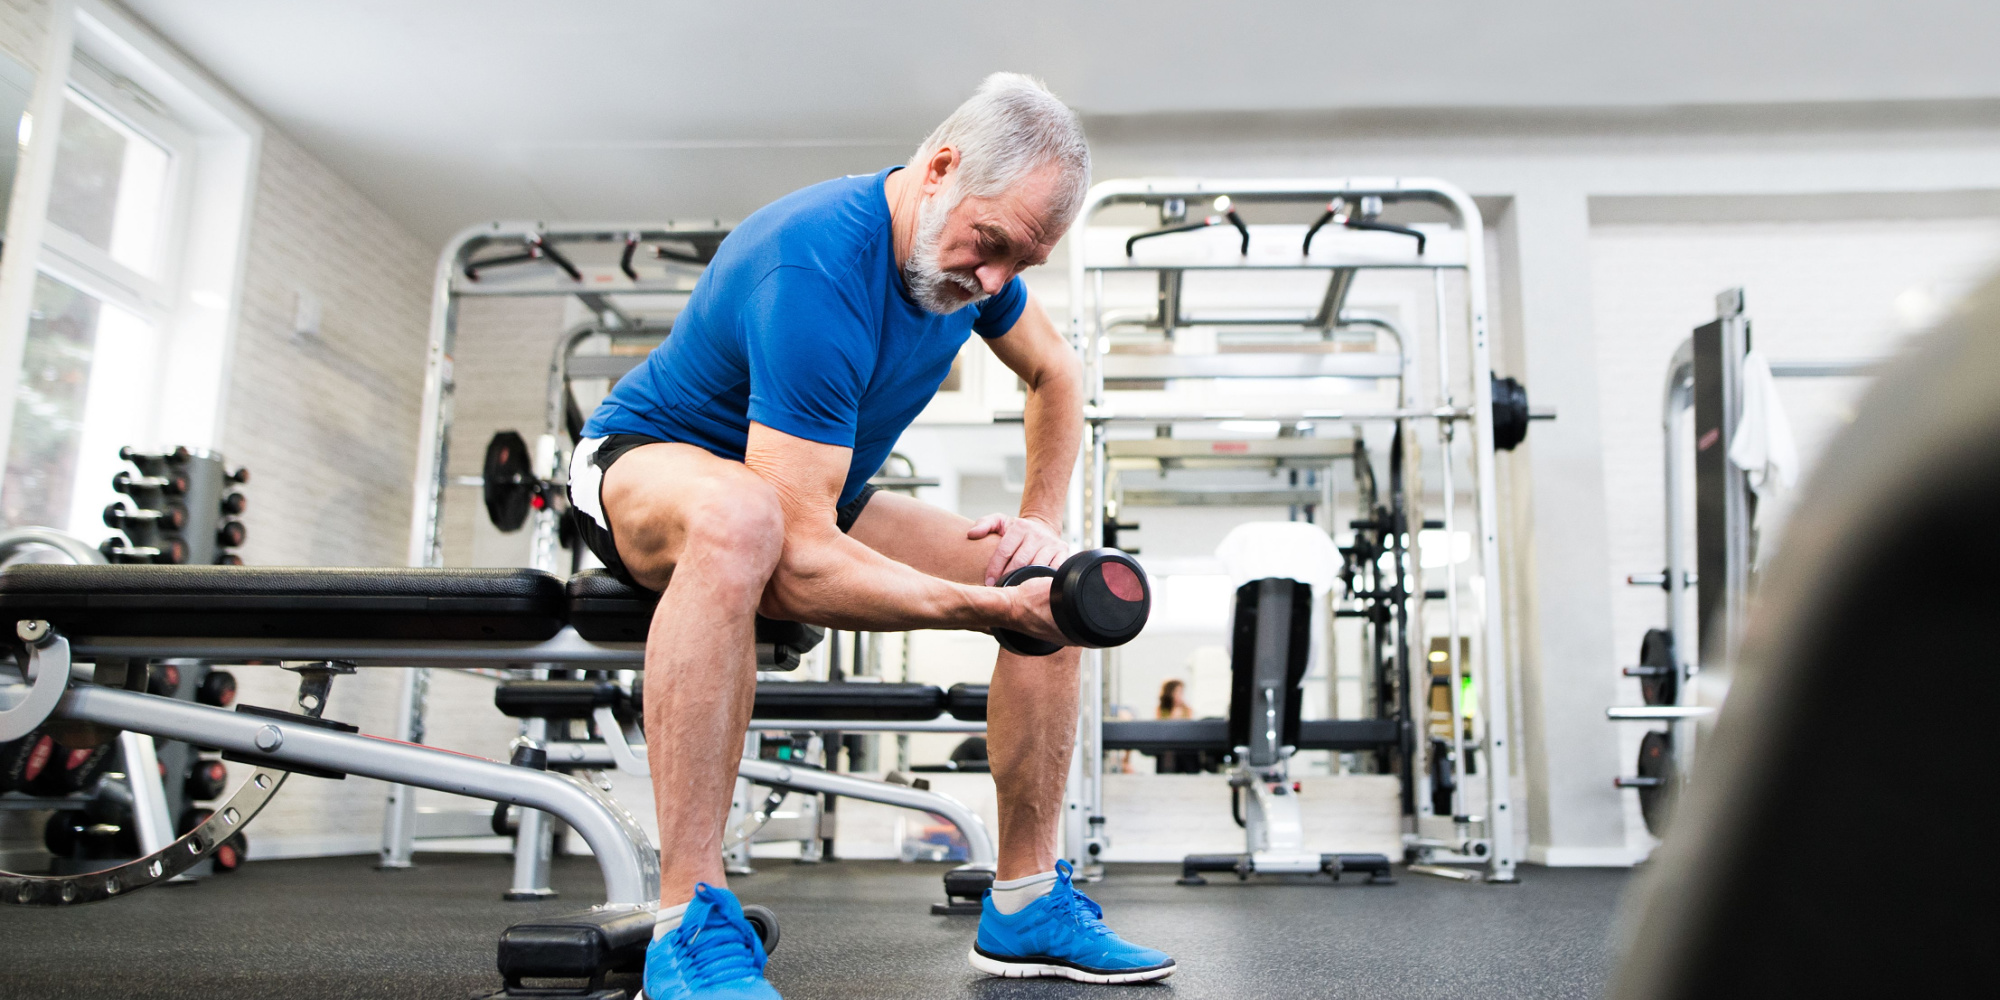 Are You Ever Too Old To Lift Weights?